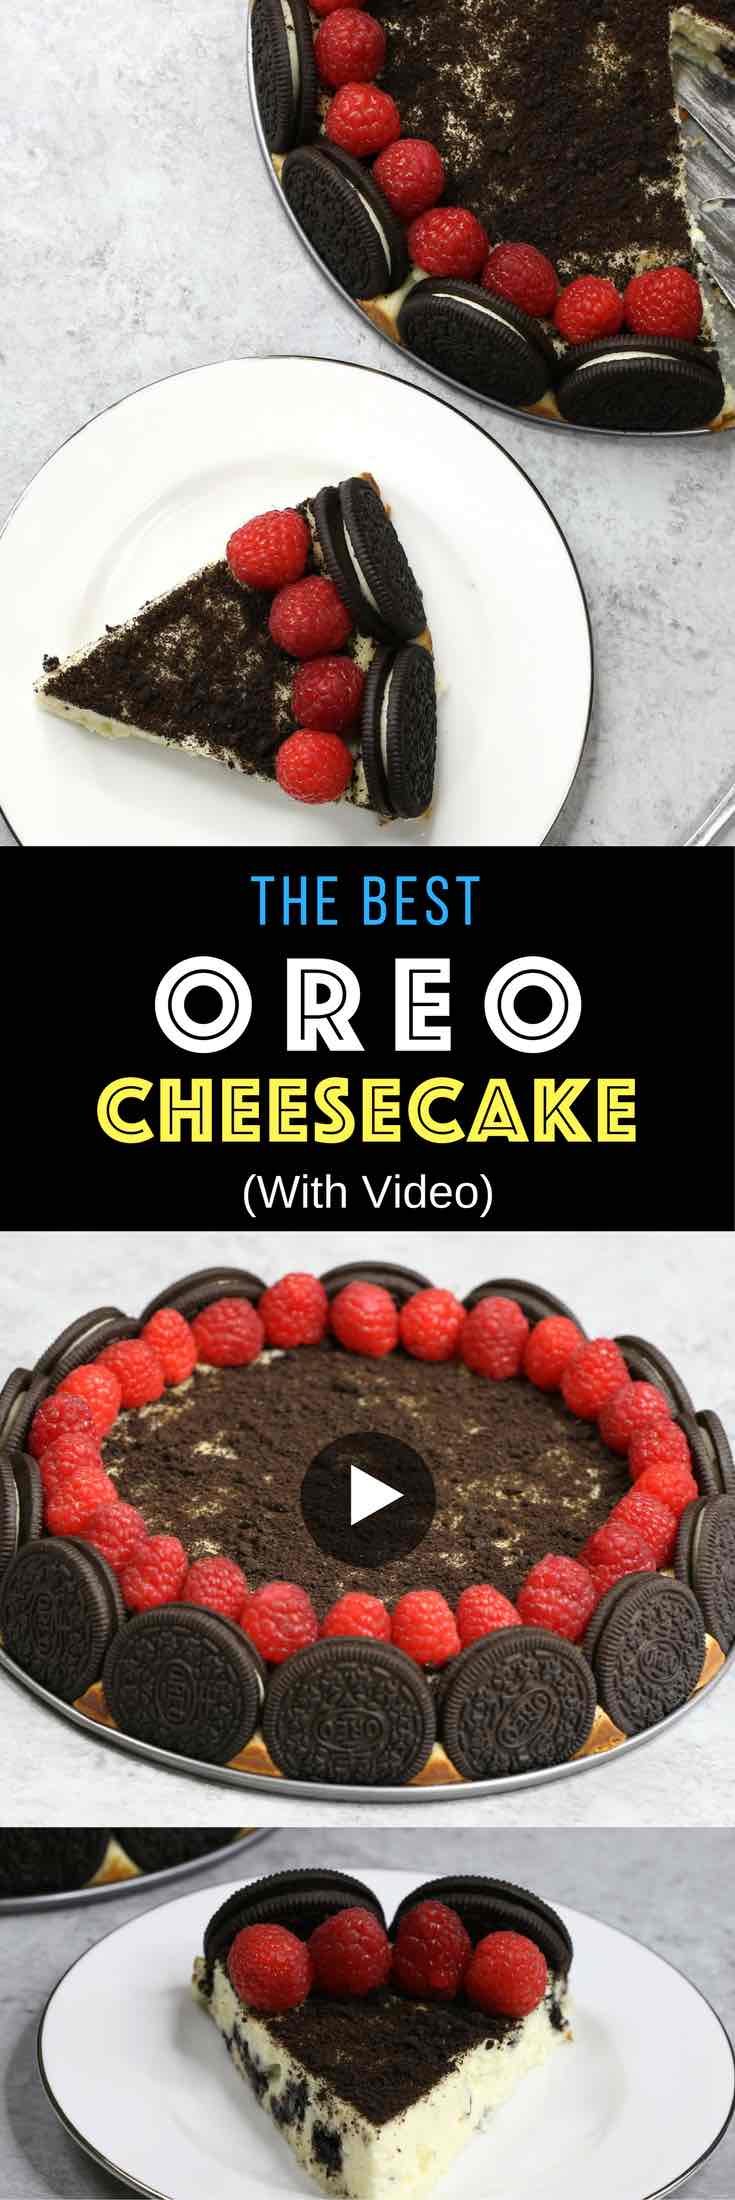 The Best Oreo Cheesecake – the easiest and most beautiful cake topped with cookies and cream crumbs and fresh raspberries. All you need is a few simple ingredients: oreo cookies, cream cheese, sugar, vanilla, eggs, sour cream and raspberries. Great for dessert, brunch, birthday parties or Mother’s Day. Video recipe. | tipbuzz.com